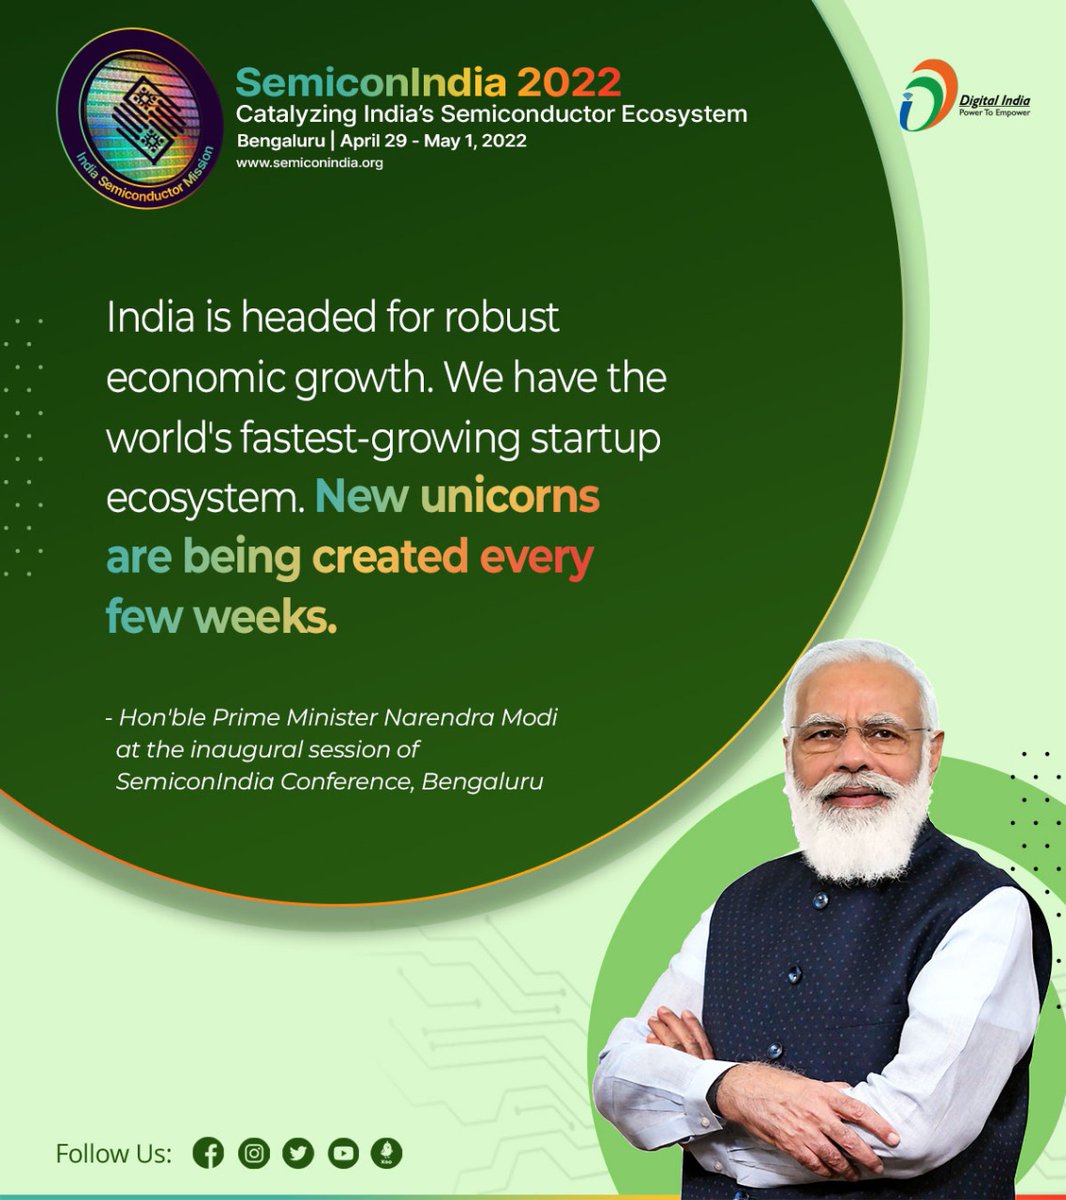 📜 Here are some important takeaways from Hon'ble PM Shri @narendramodi's speech at the inaugural session of #SemiconIndia2022, the first ever conference that aimed at catalyzing India’s #semiconductor ecosystem! @GoI_MeitY @AshwiniVaishnaw @Rajeev_GoI